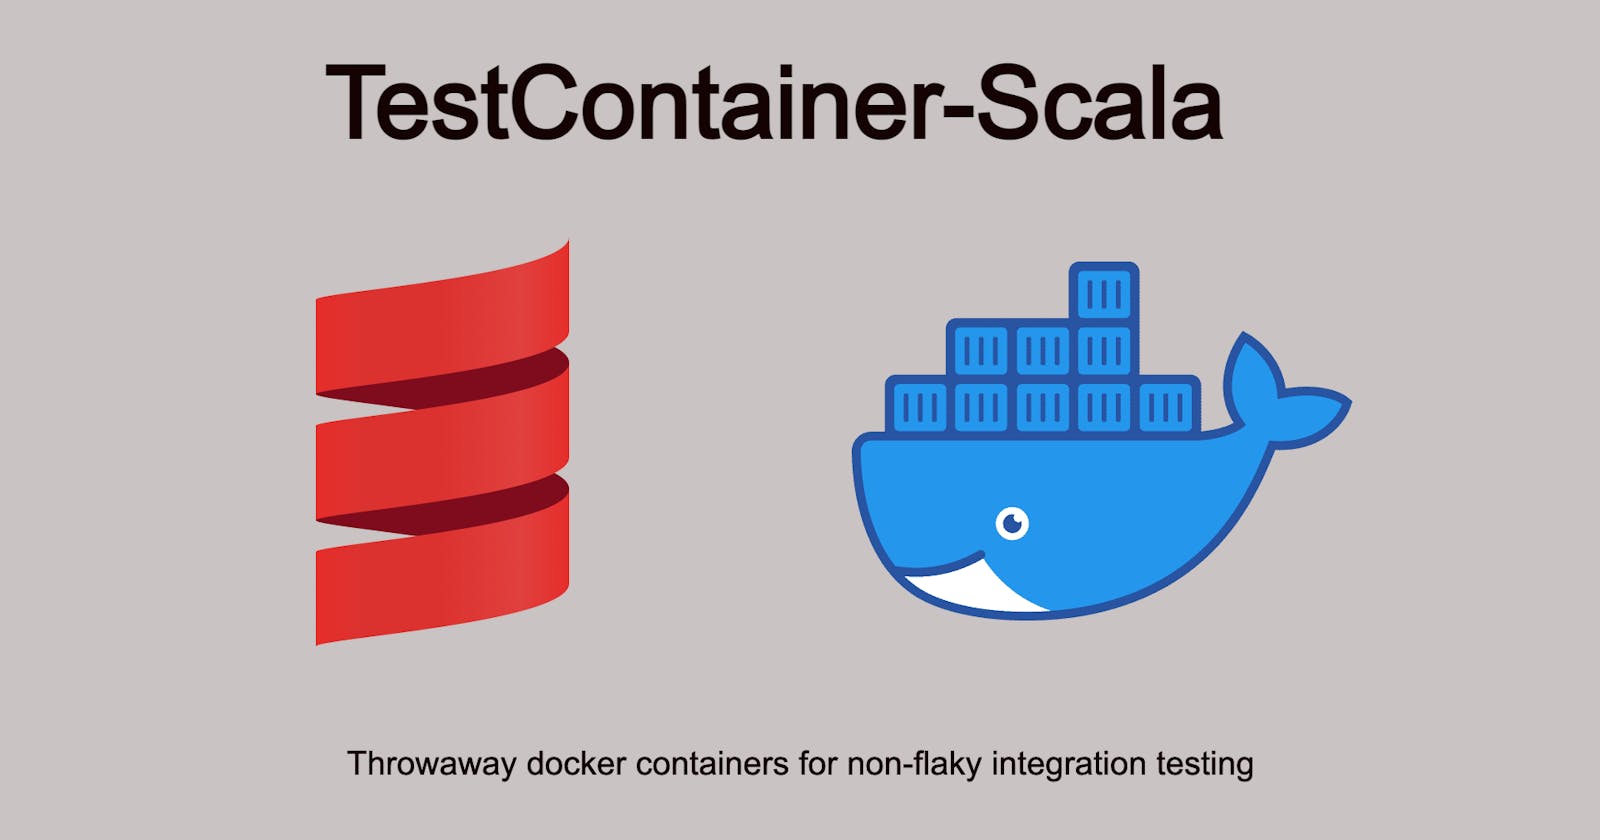 Easy Integration Testing with TestContainer-Scala